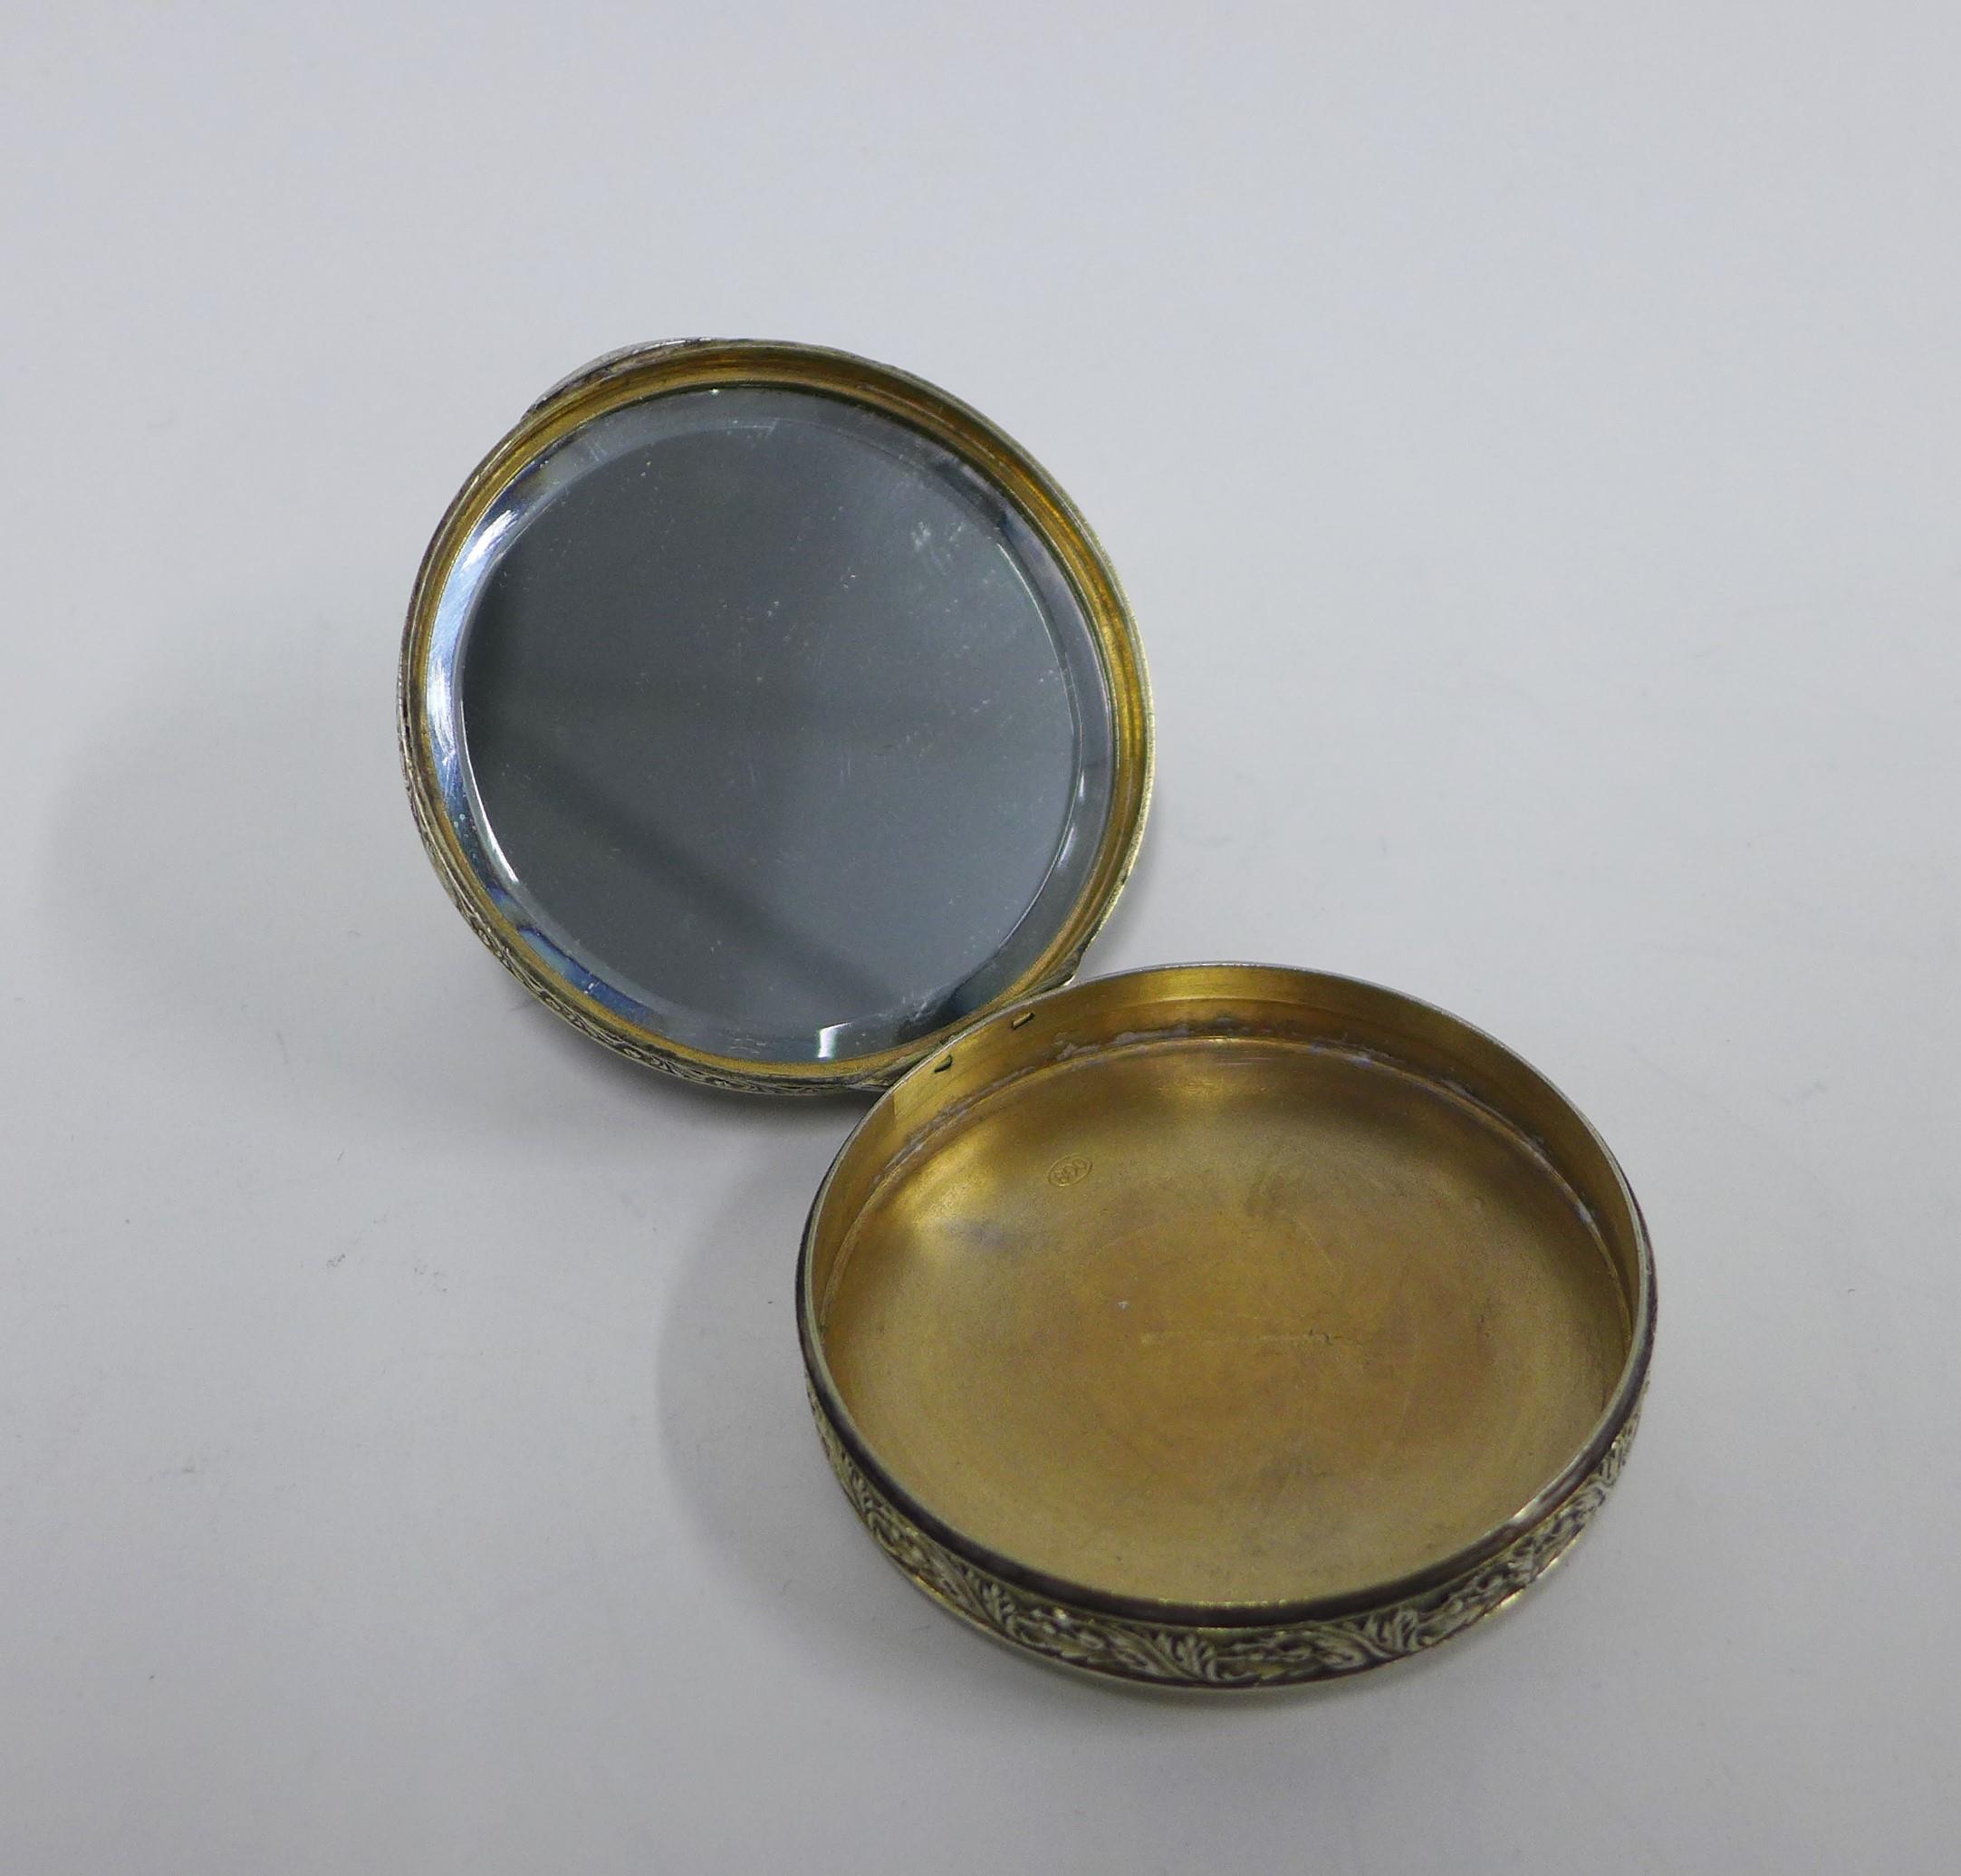 1950s Marcel Rochas of Paris silver lipstick compact and a German silver powder compact with a lapis - Image 2 of 3